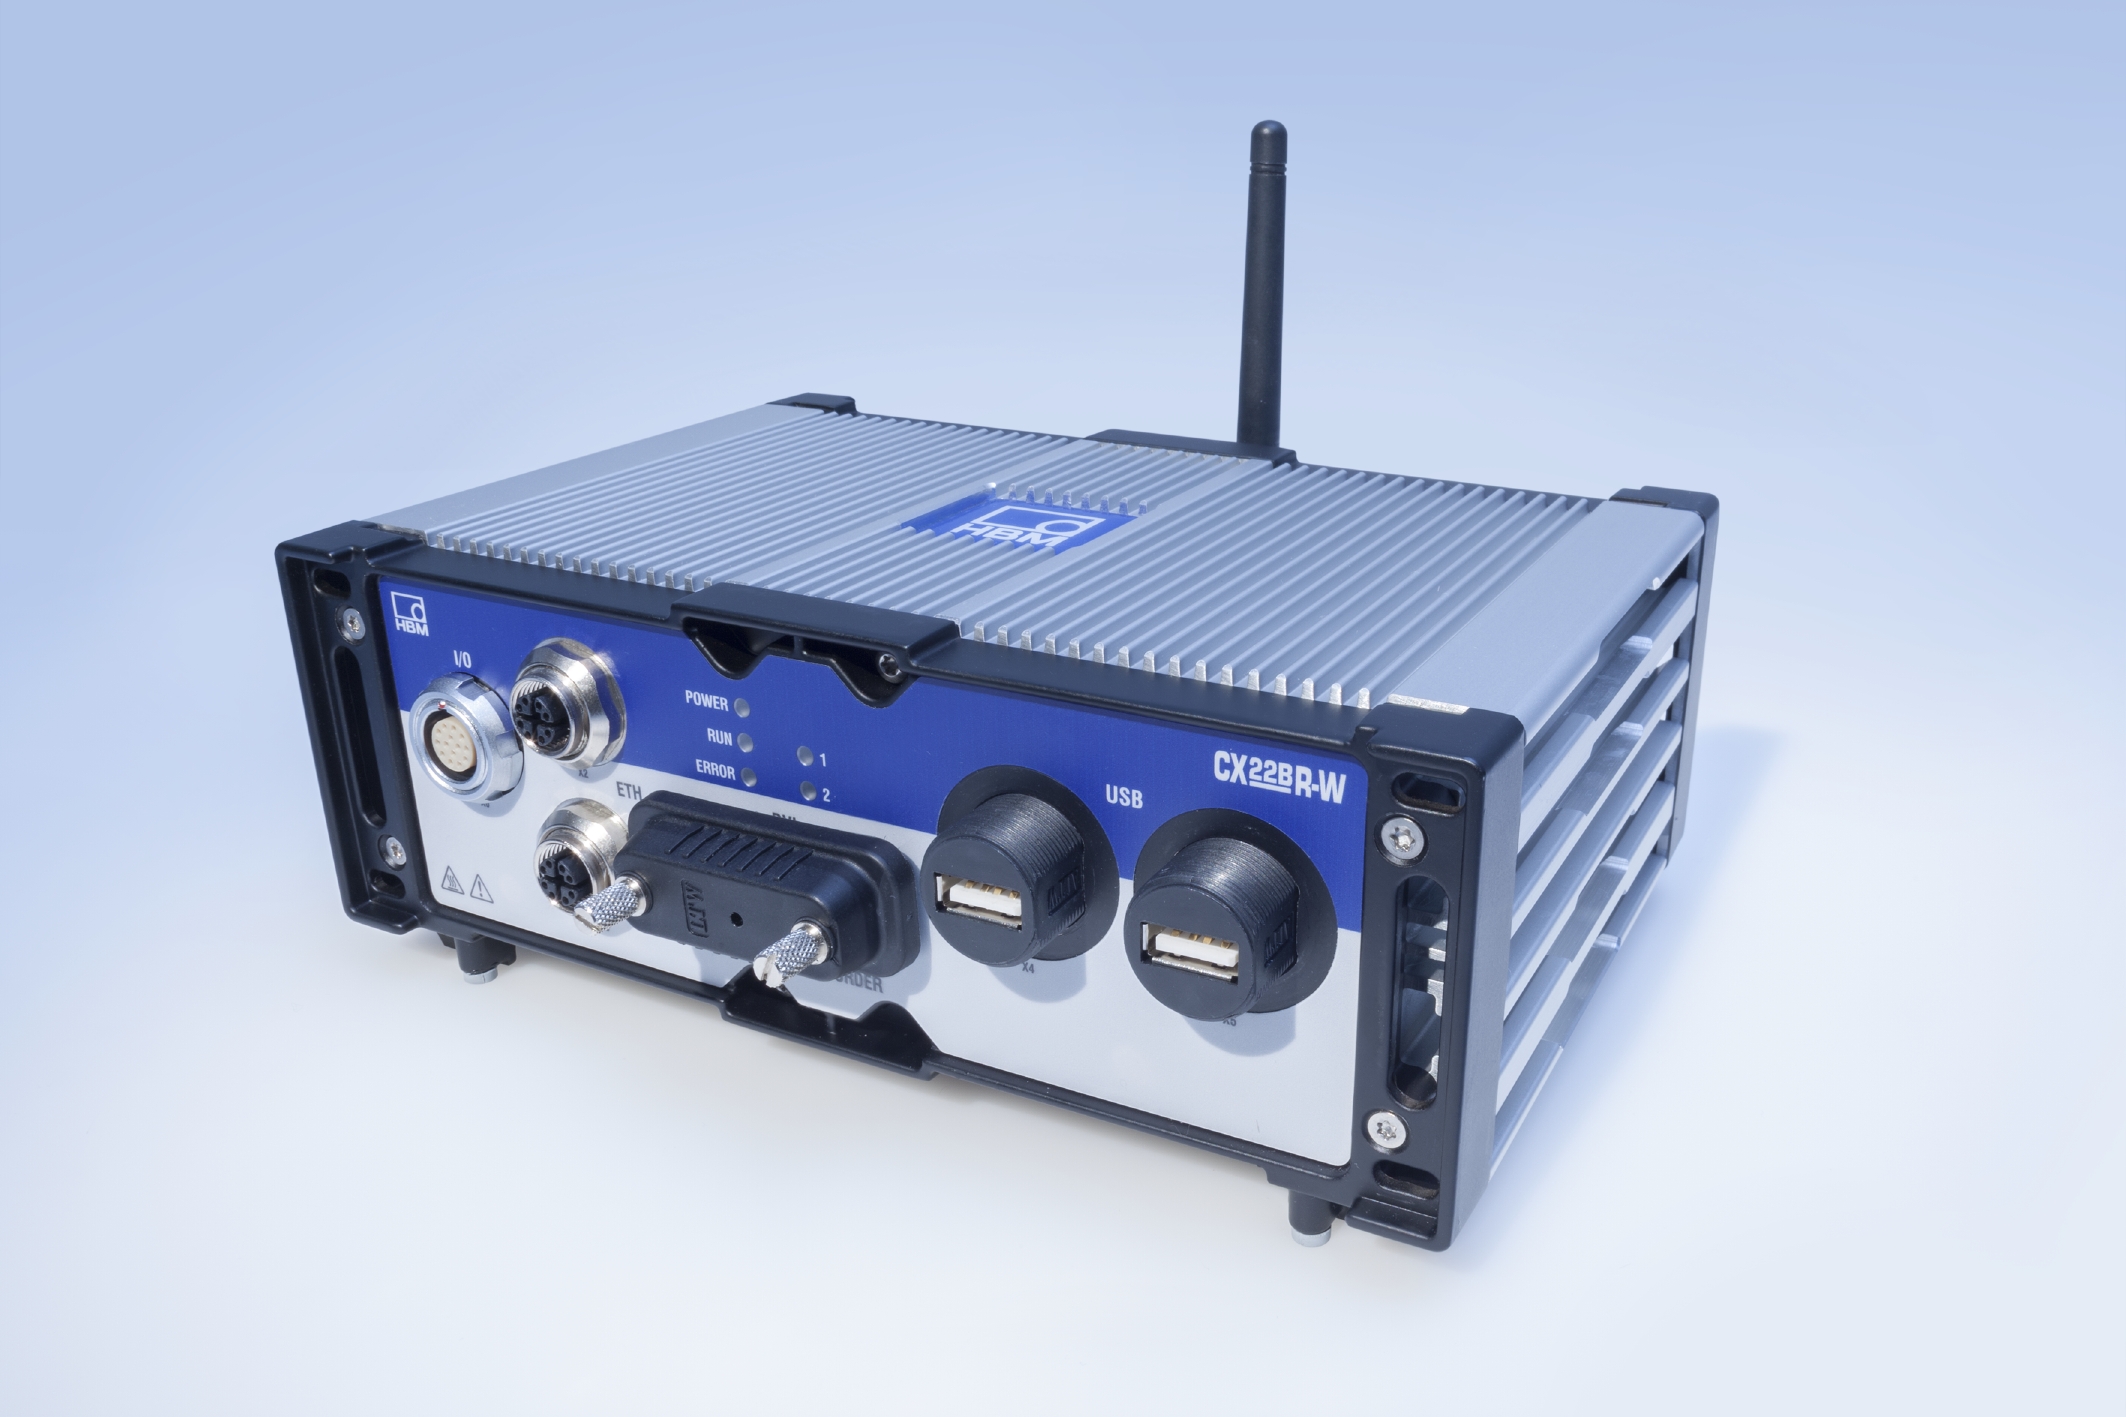 Rugged Data Recorder Provides Fast Results in Interactive Vehicle Testing